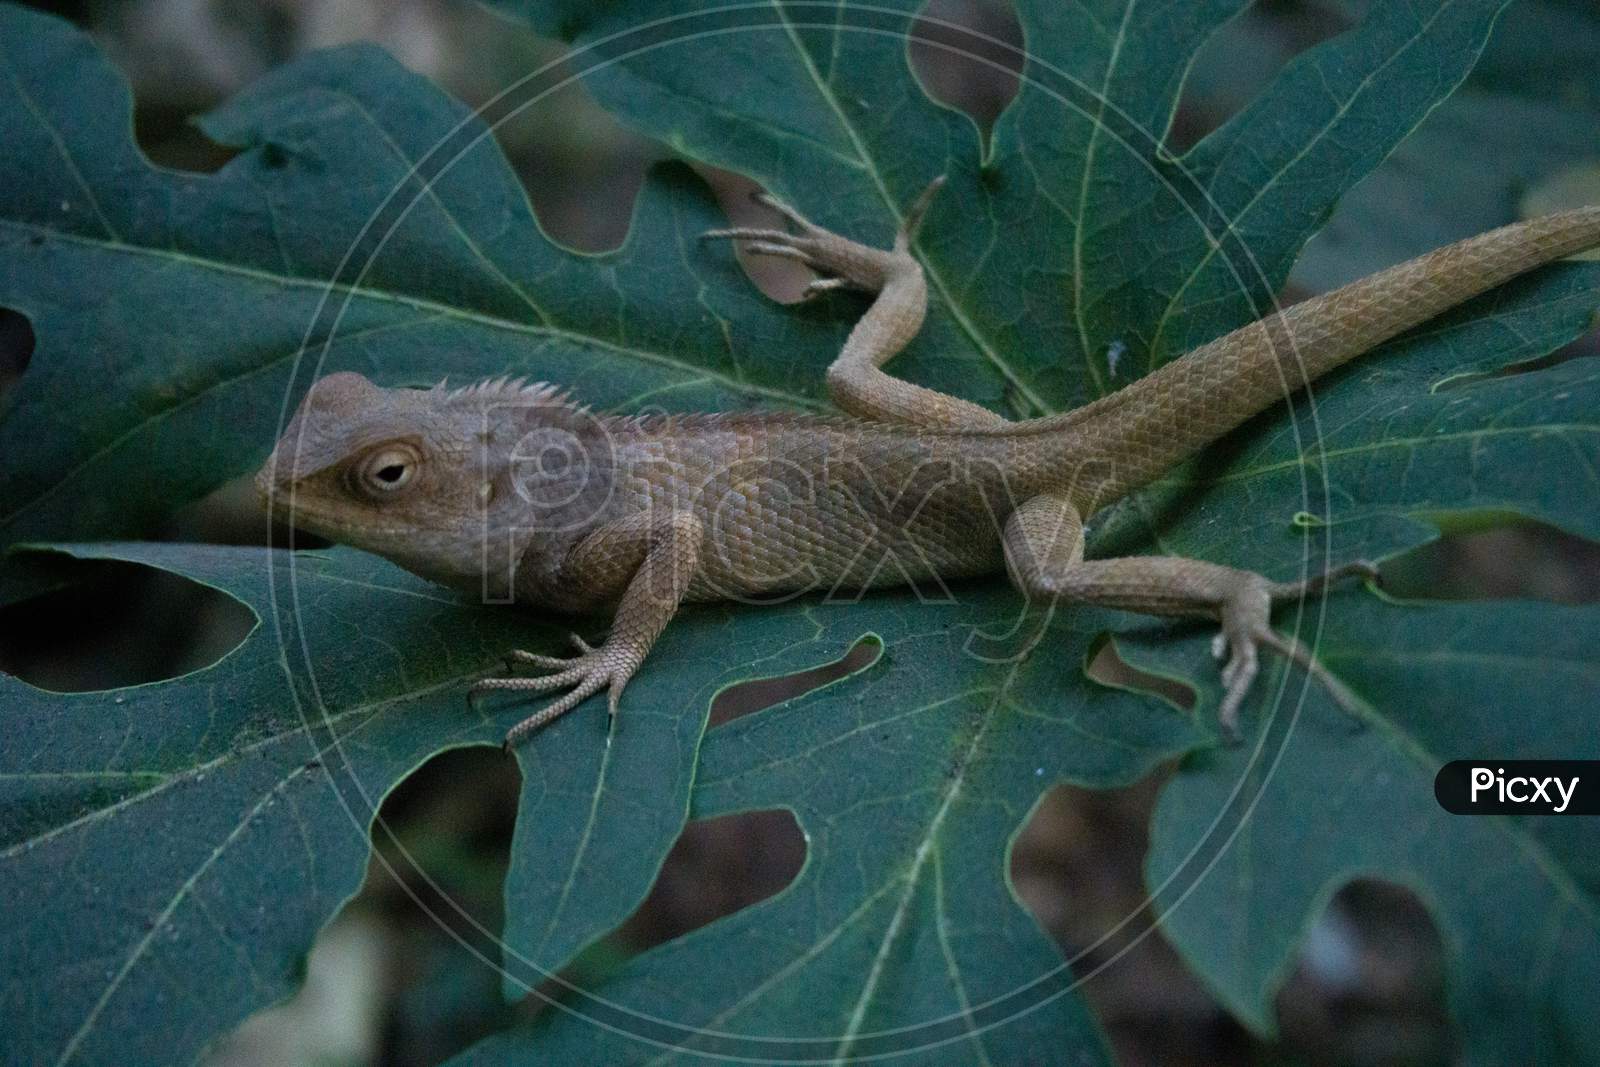 Chameleon Full Body Image , In This Image Chameleon Is Sitting In The Big Papaya Leaf , It Is Found In India